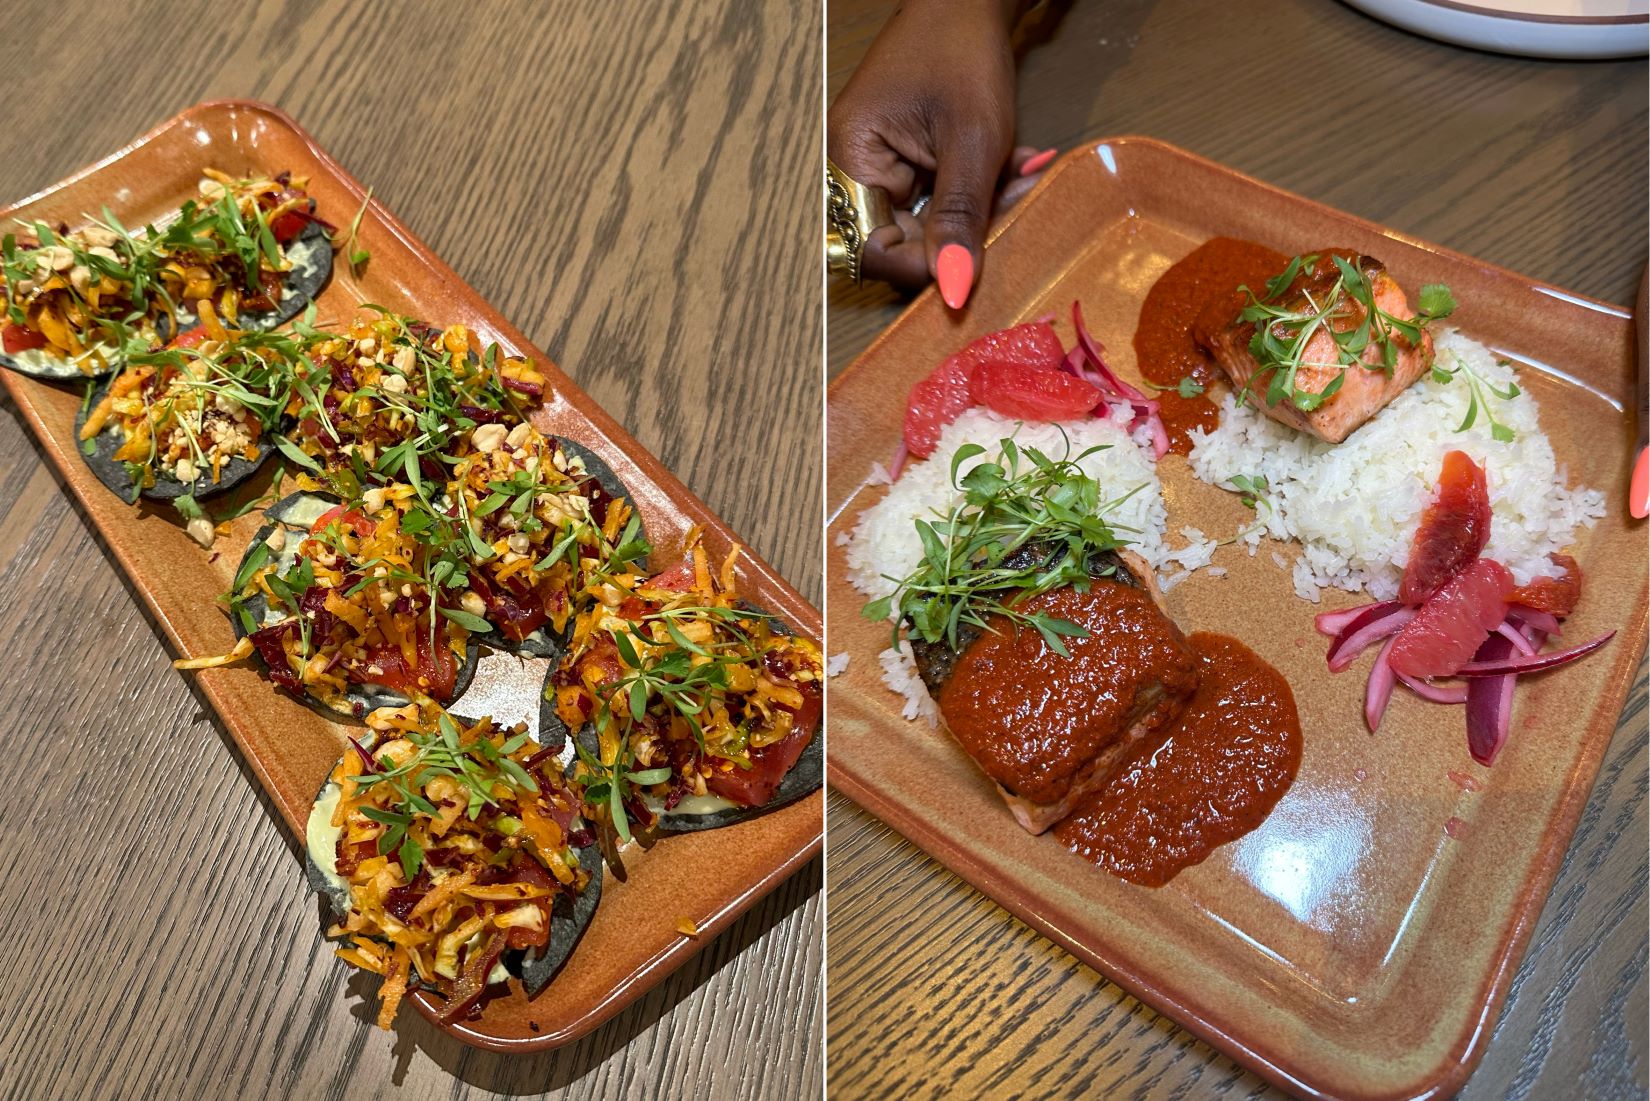 An image of the spicy Tuna Tostada and Achiote Crispy-Skin Salmon from Rumorosa.